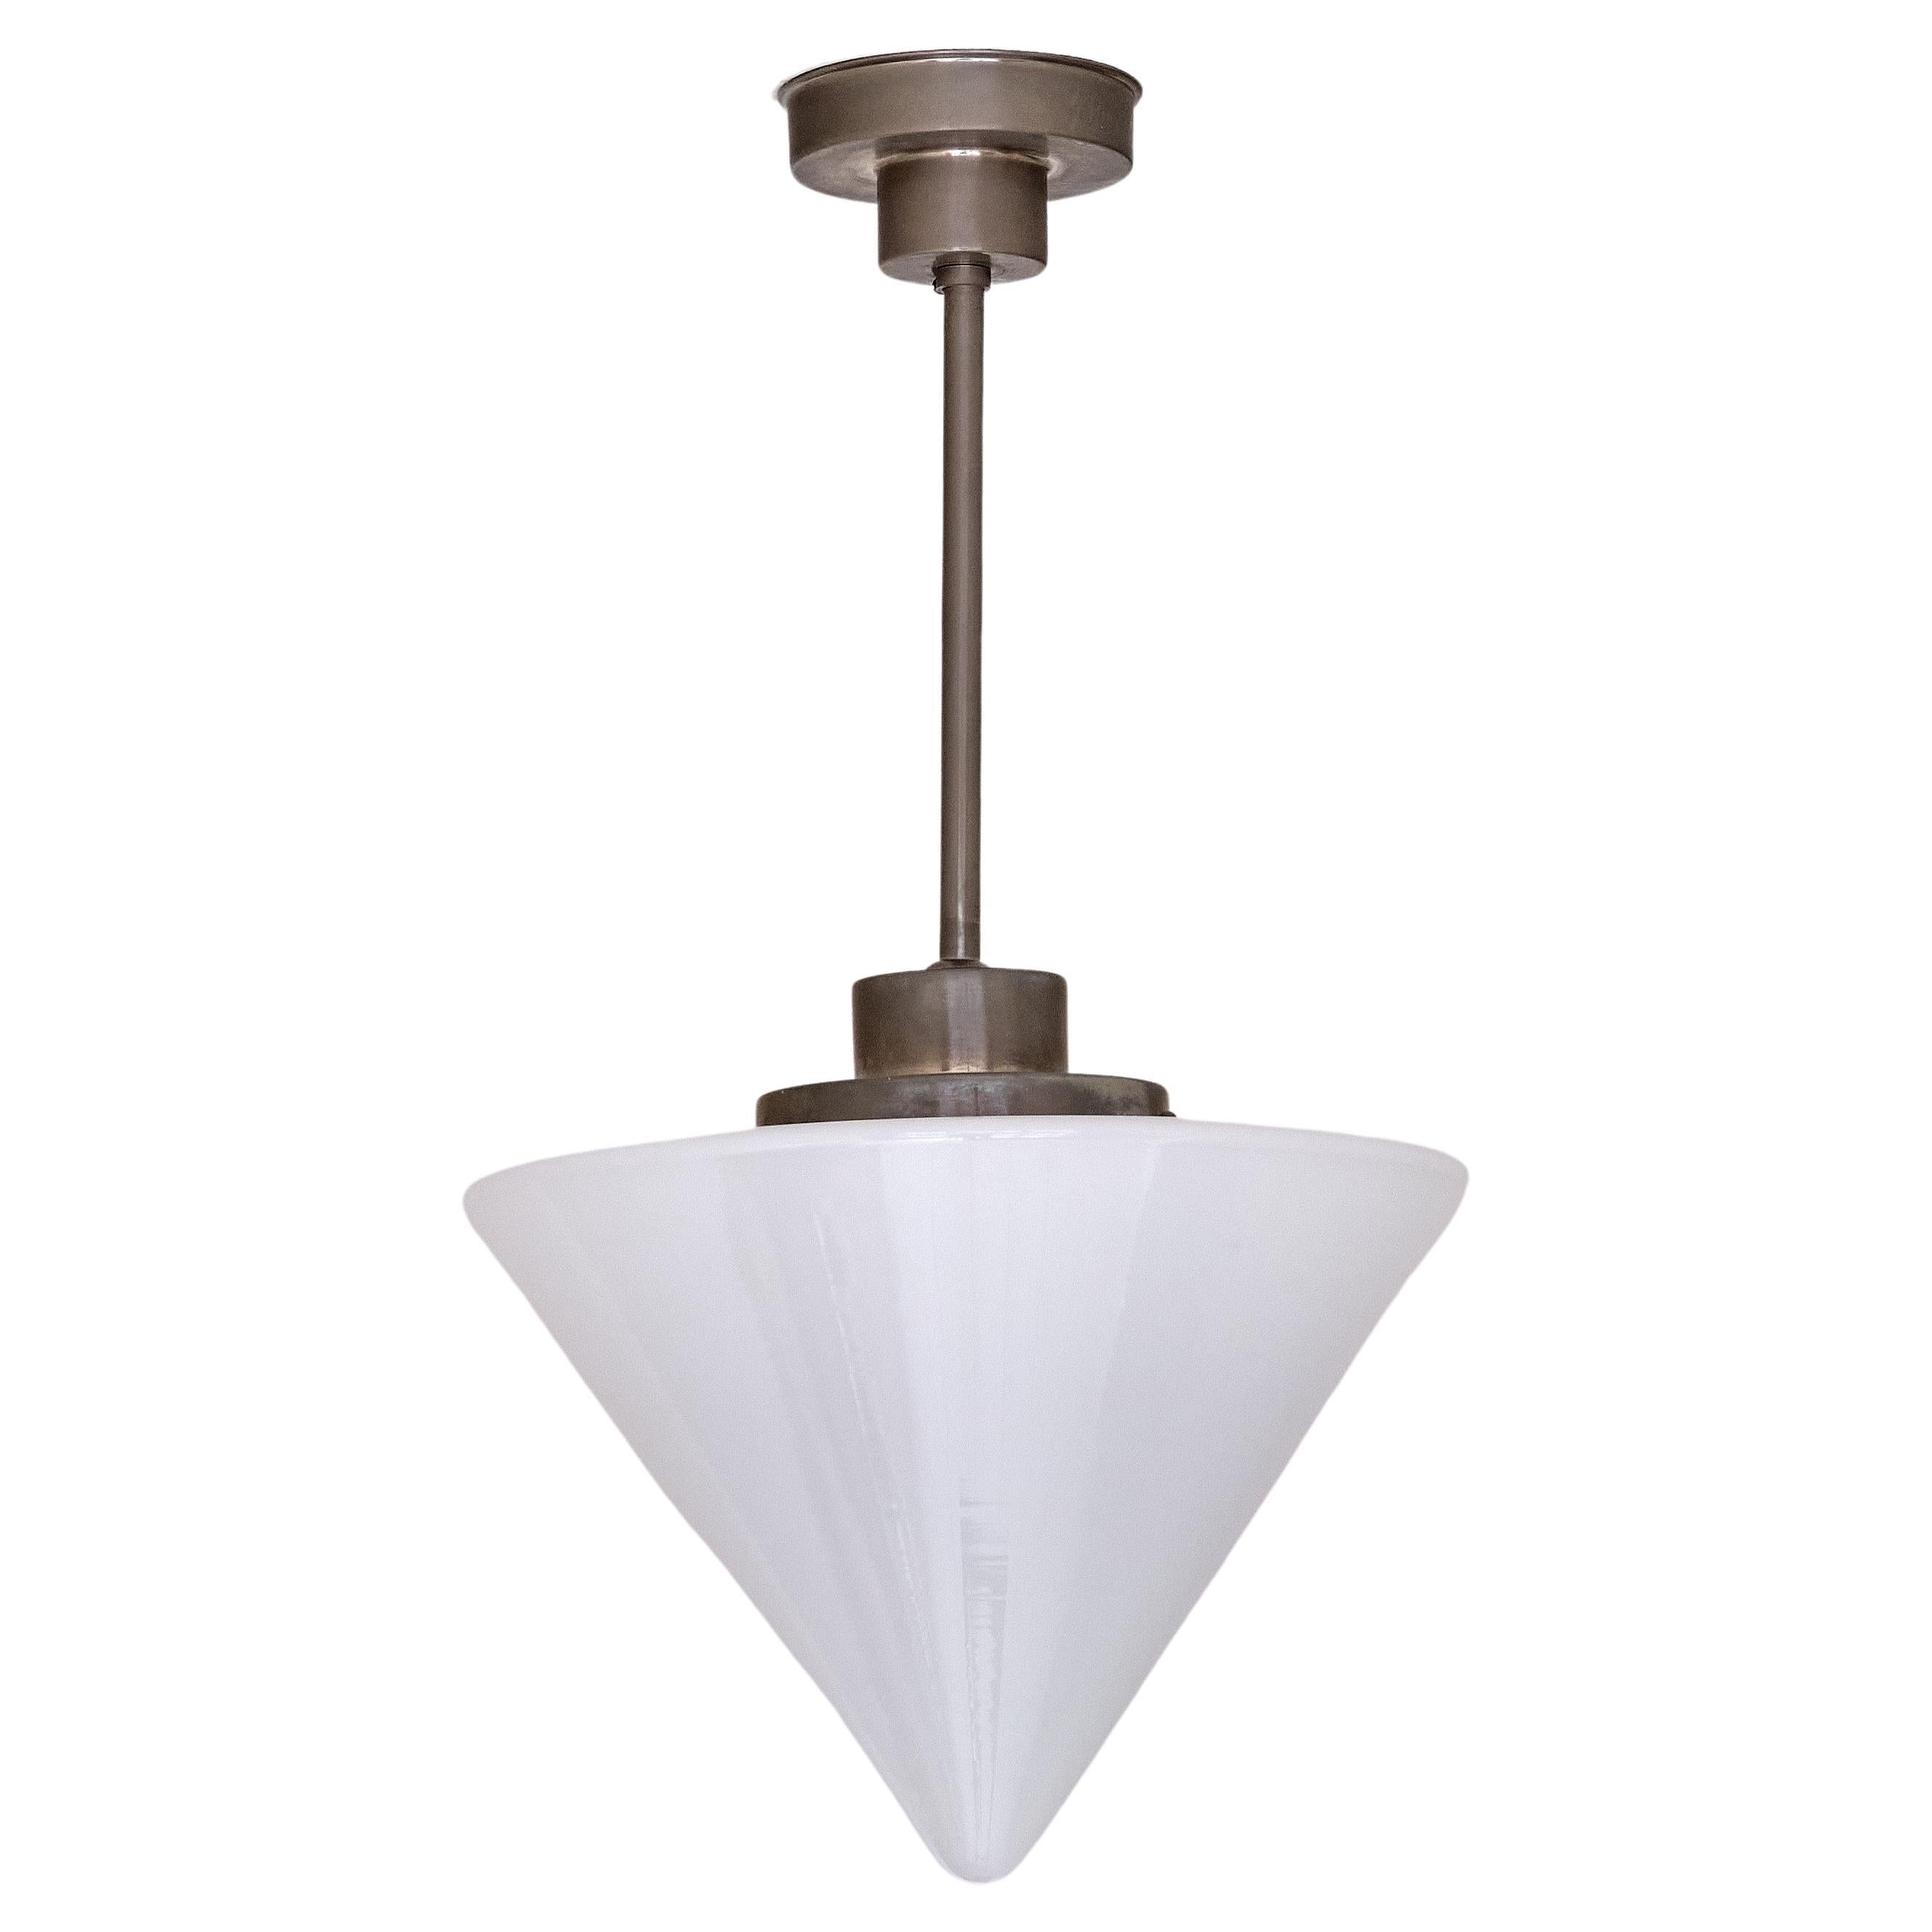 Gispen Cone Shaped Pendant Light in Opal Glass and Nickel, Netherlands, 1930s